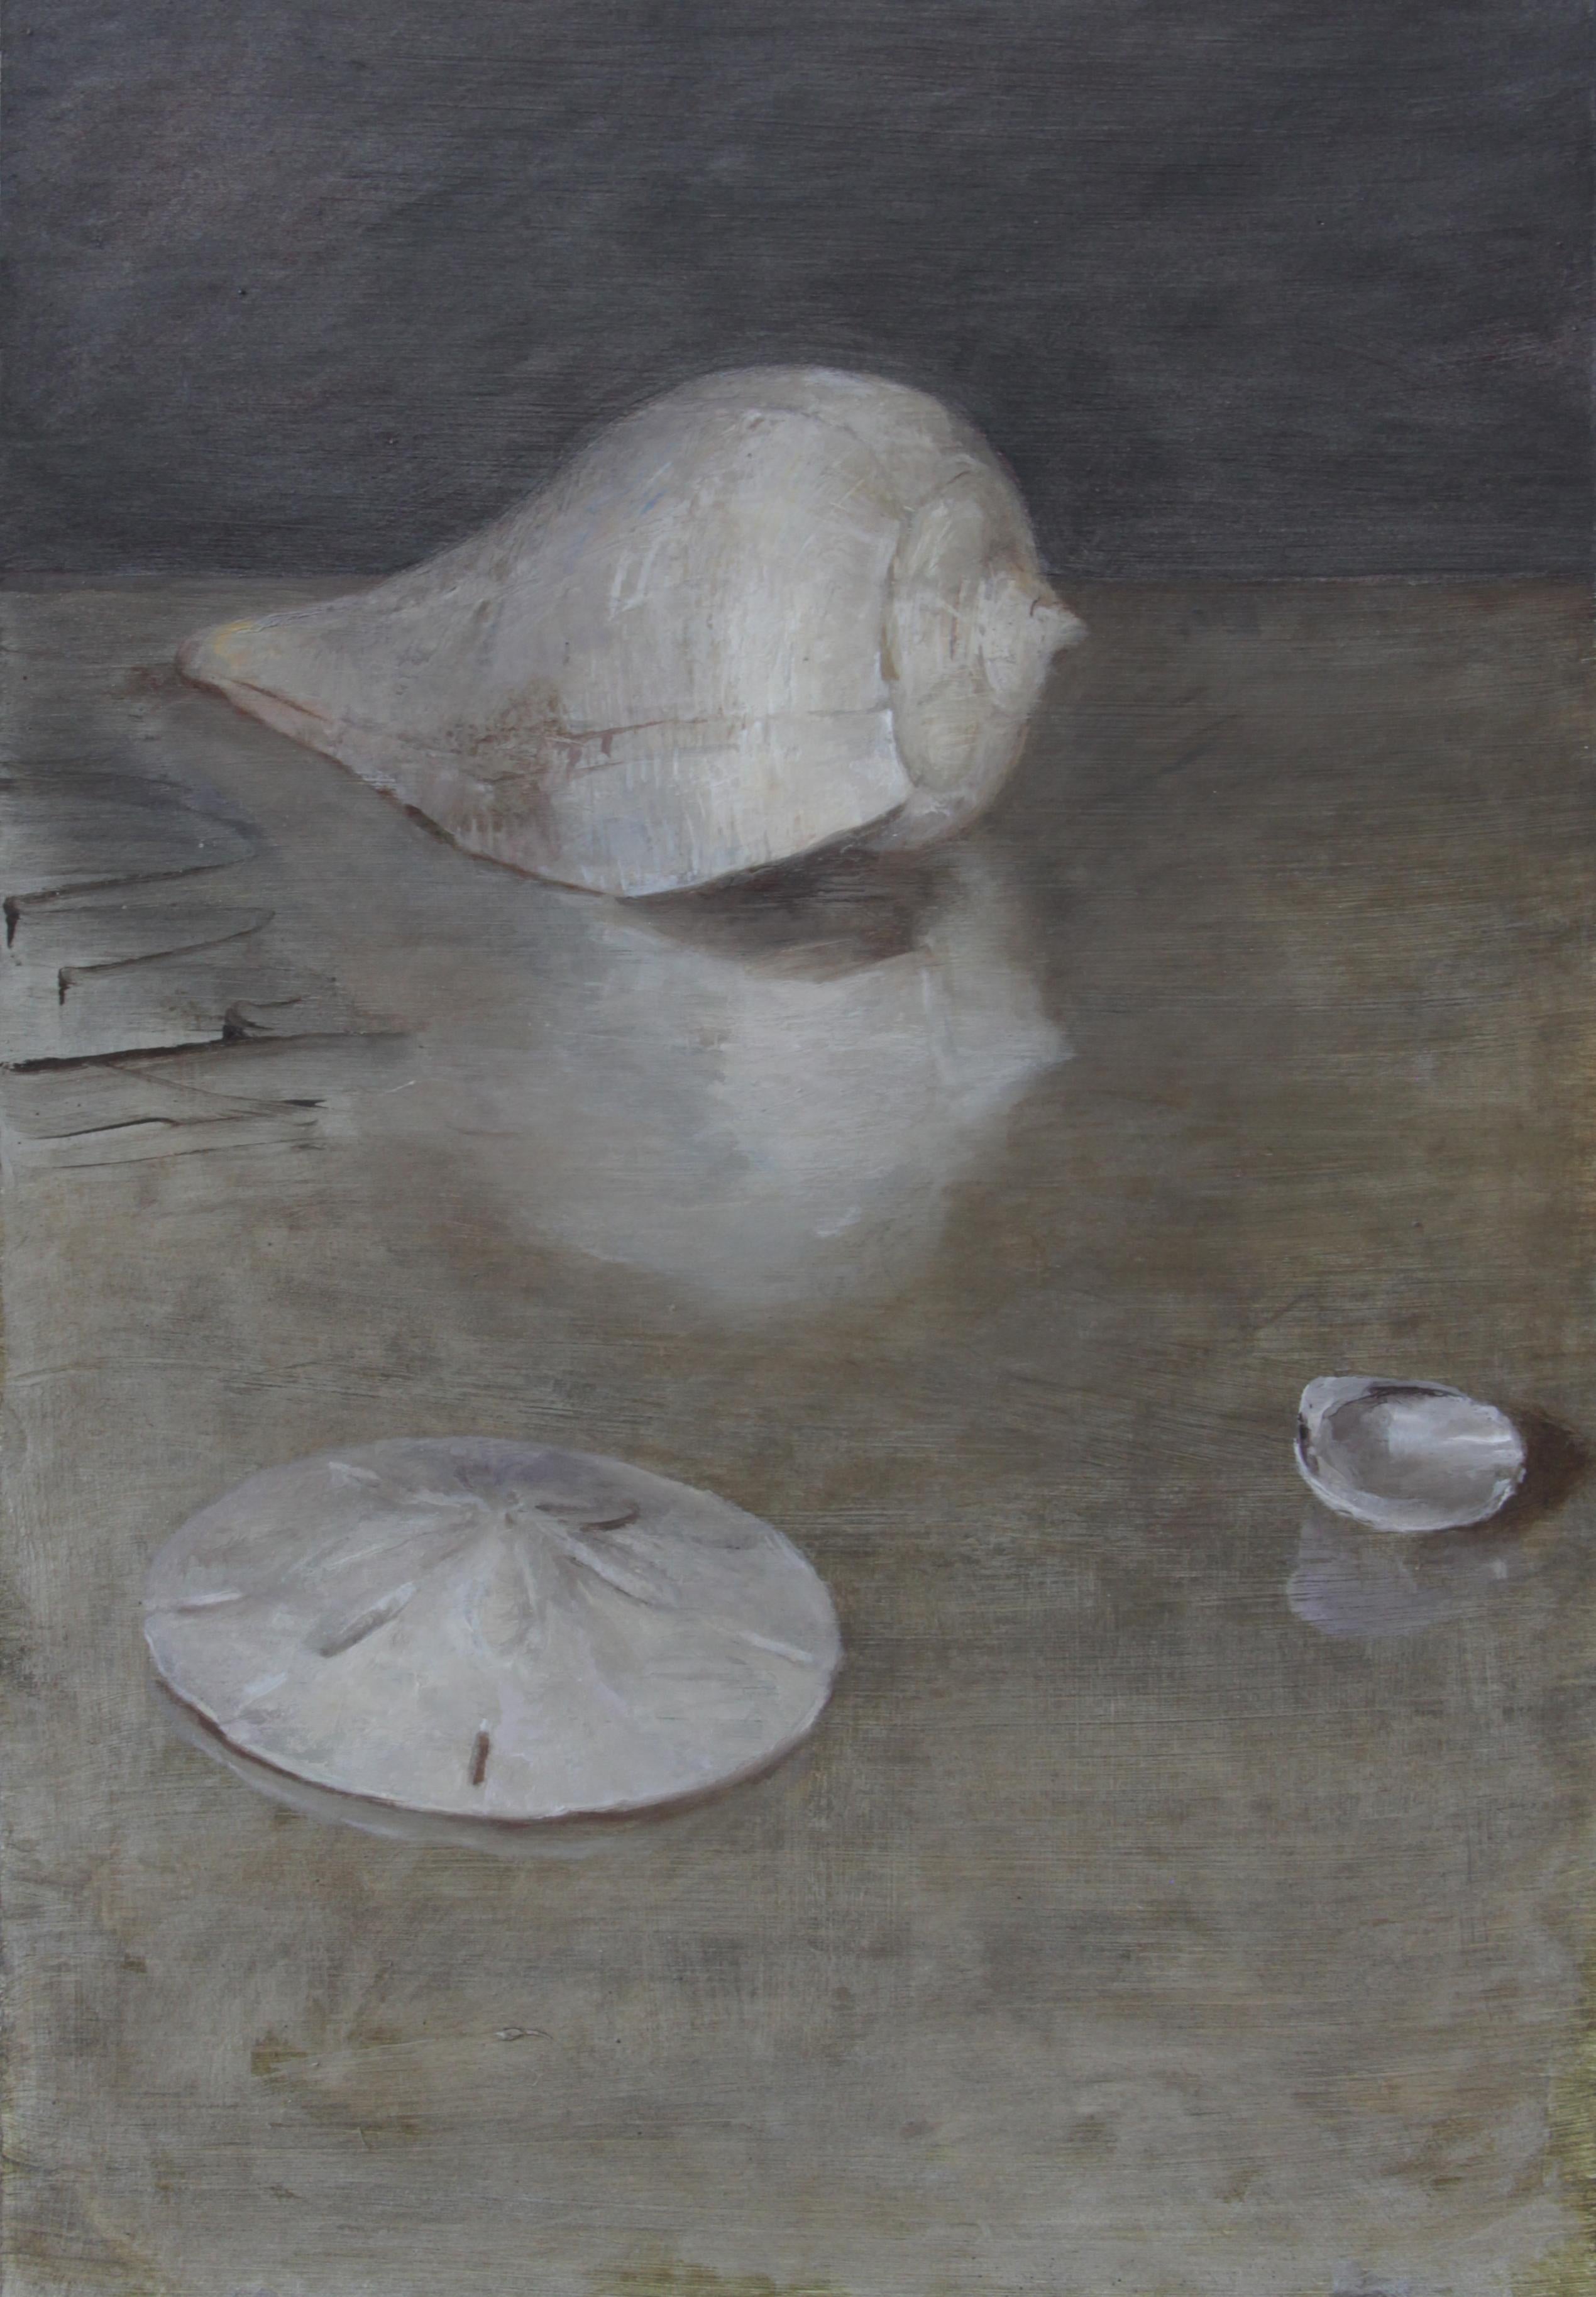 The classically composed still life of three shells by Helen Oh brings the viewer in with its richness of color and dreamy quality of the surface. The inherent beauty of the shells are emphasized by the soft surfaces begging the viewer to reach out